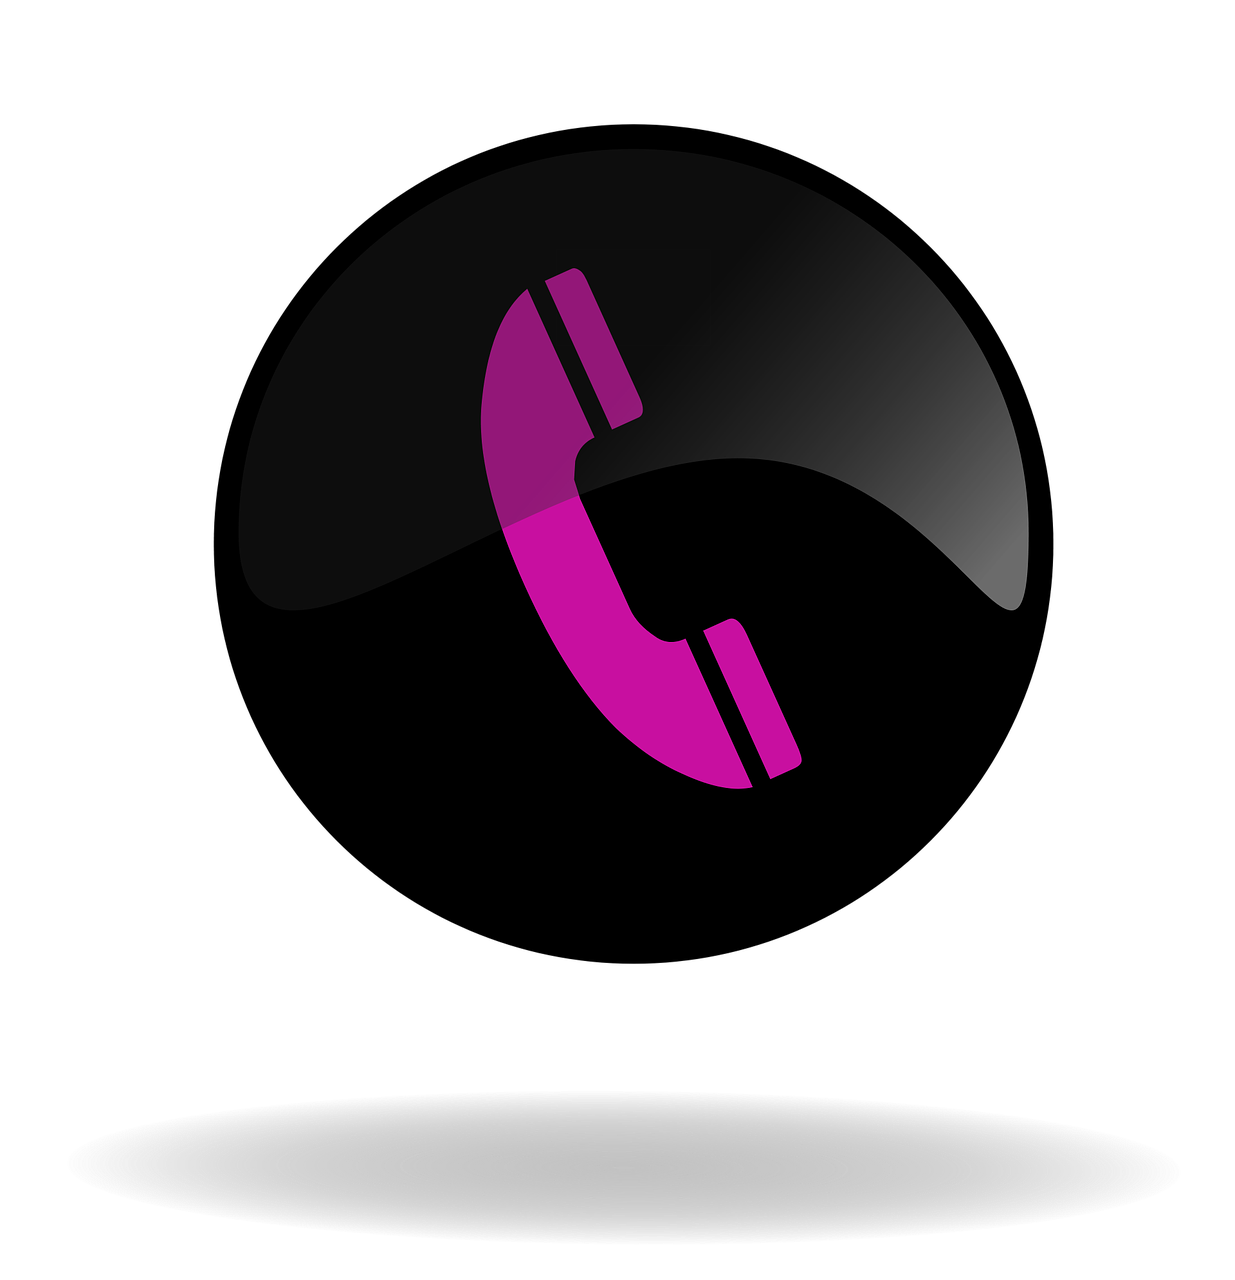 call call button black and pink button free photo